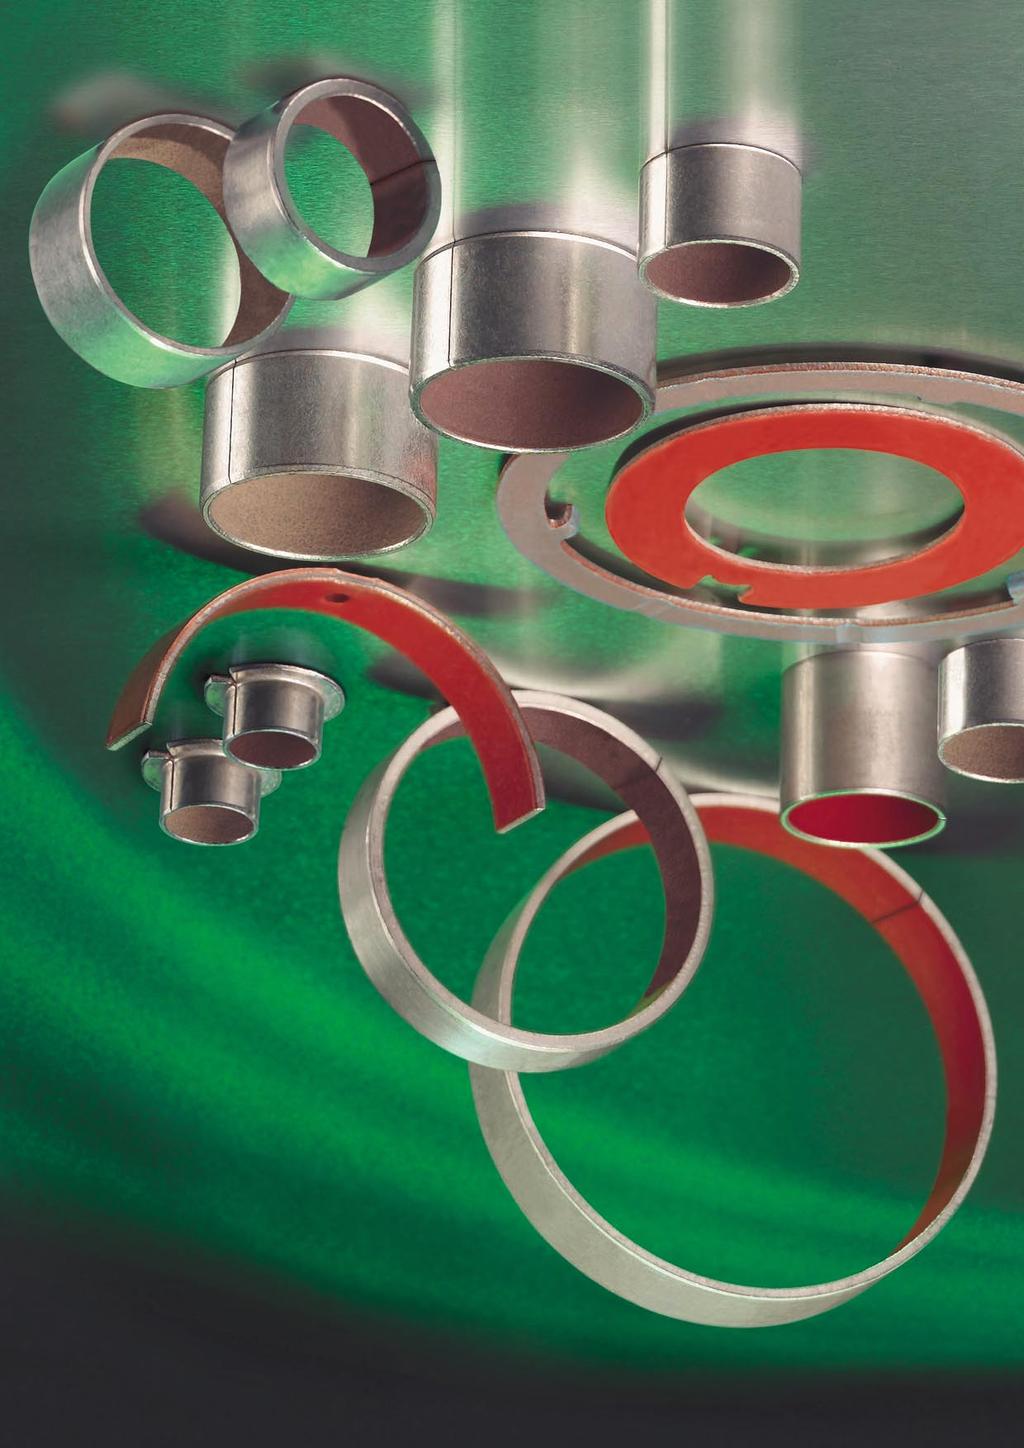 PTFE Based Lead Free Metal-Polymer Plain Bearing Materials for